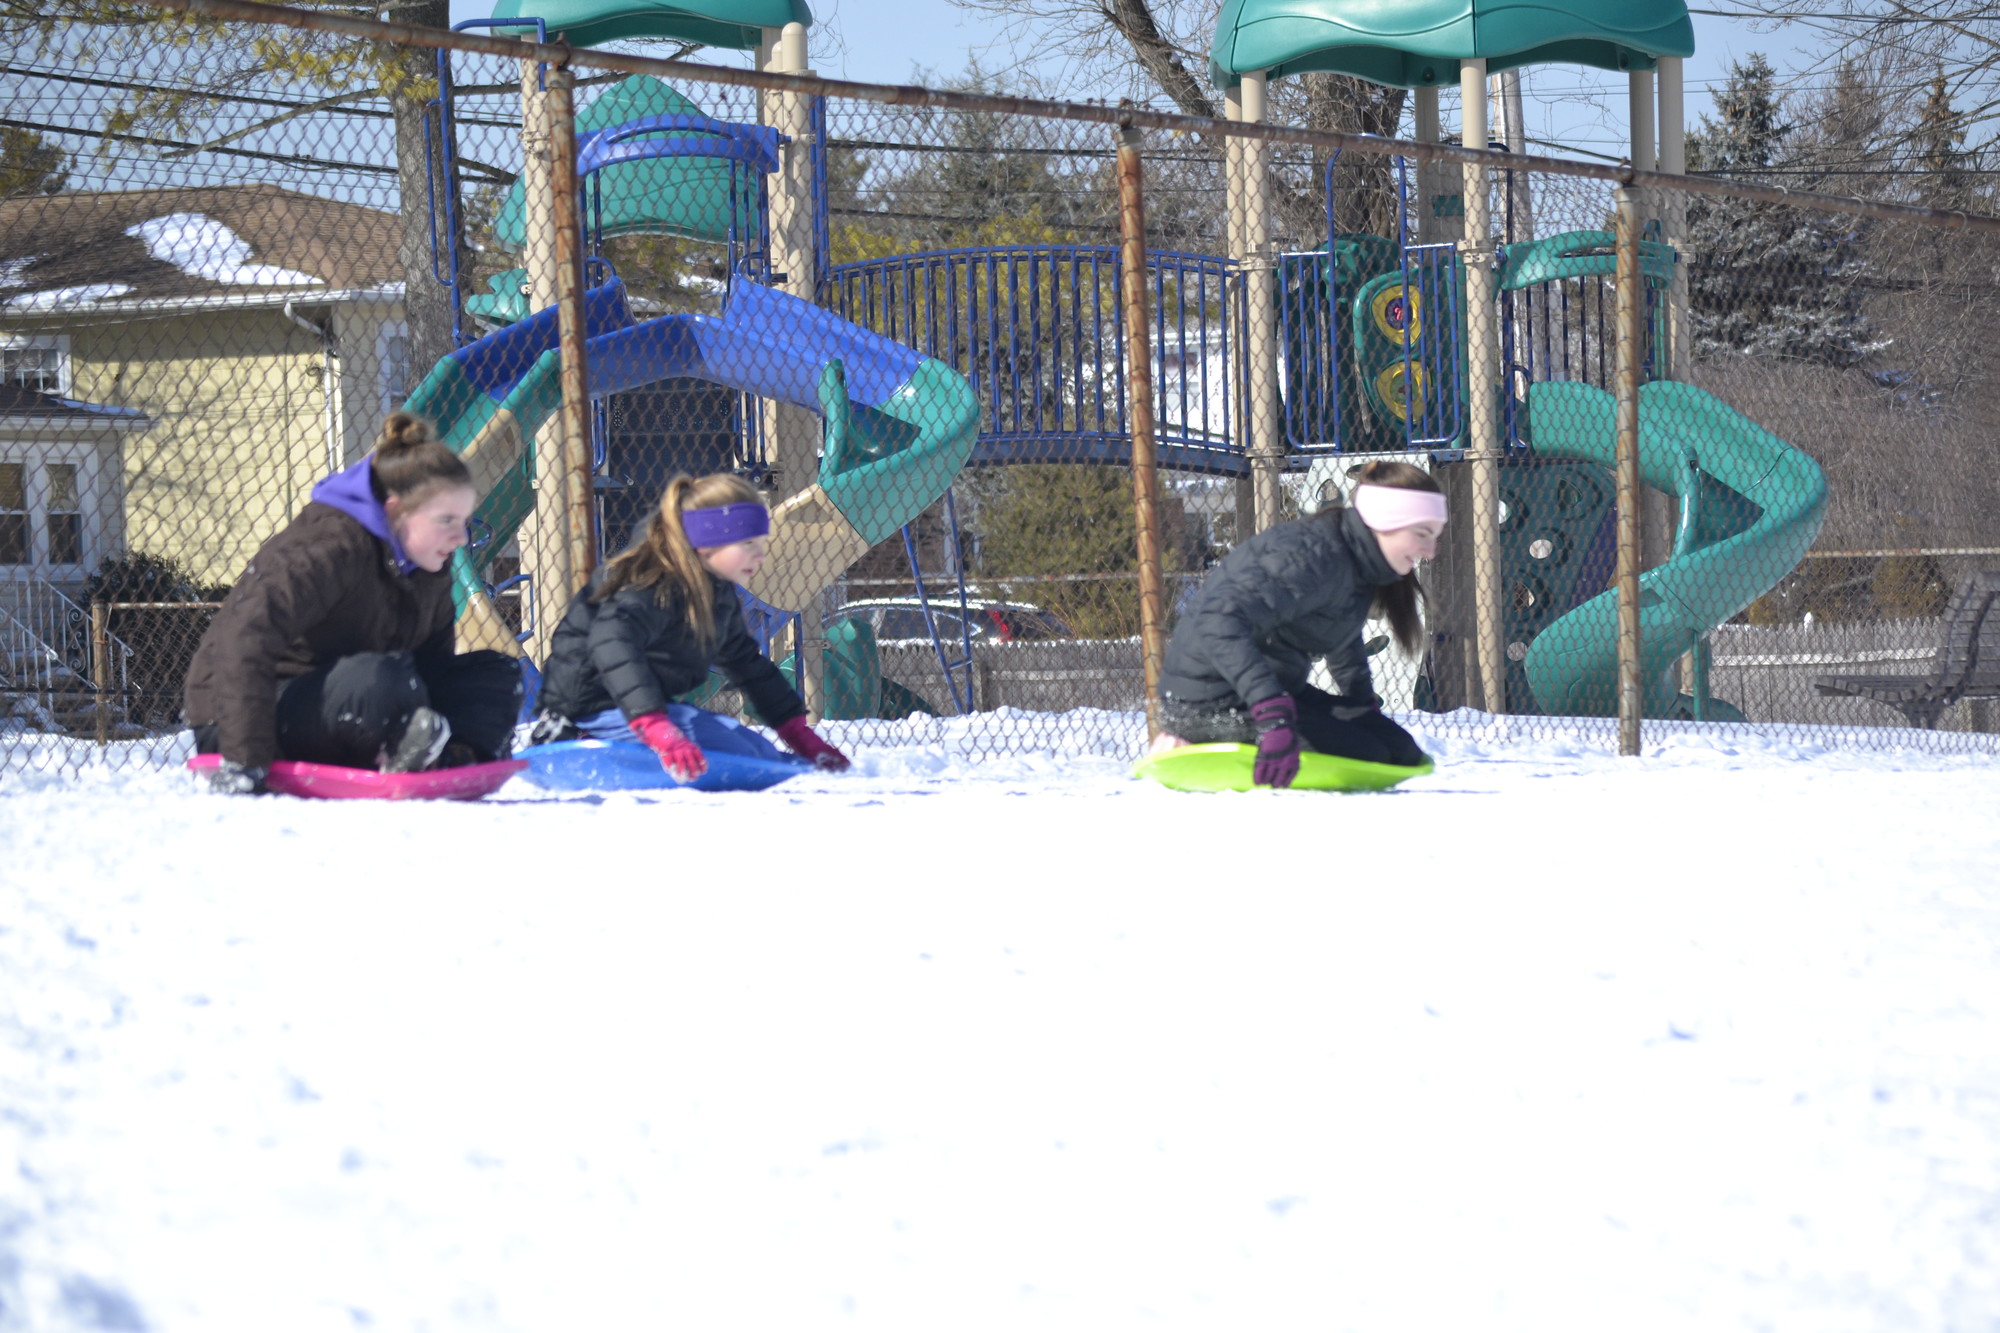 One silver lining of the cold? Sledding at Parkway Elementary School, where 12-year-olds Erin Rauchdauer and Julia Auricchil, and Caitlyn Auricchil, 15, spent a snowy day last week.                Photo by Nicole Monteleone/Herald